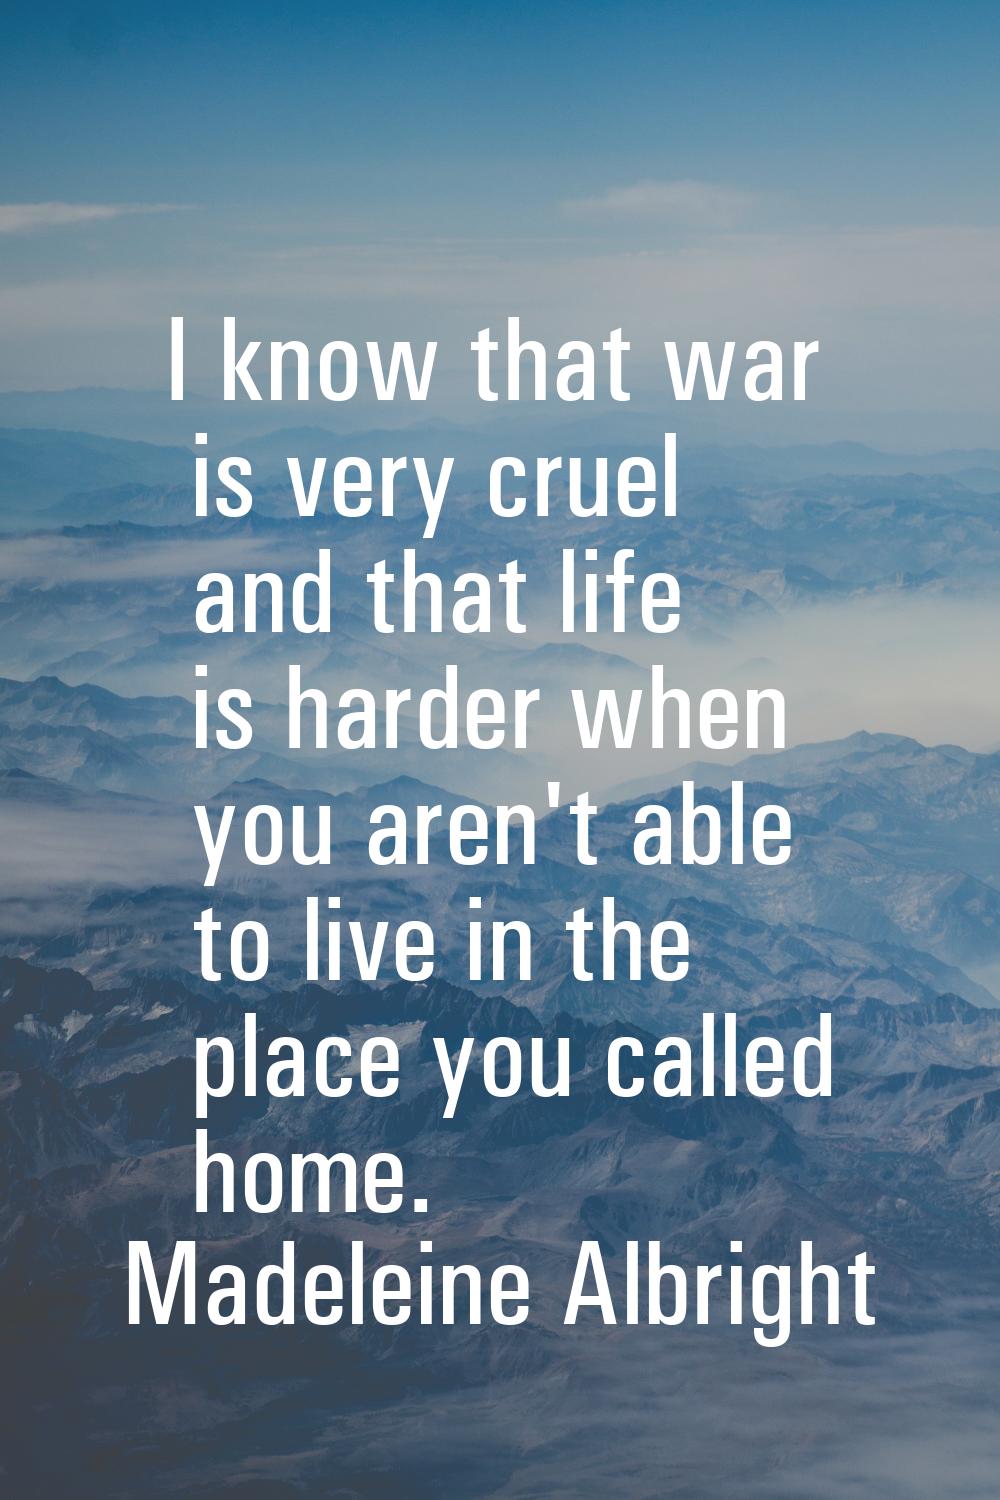 I know that war is very cruel and that life is harder when you aren't able to live in the place you